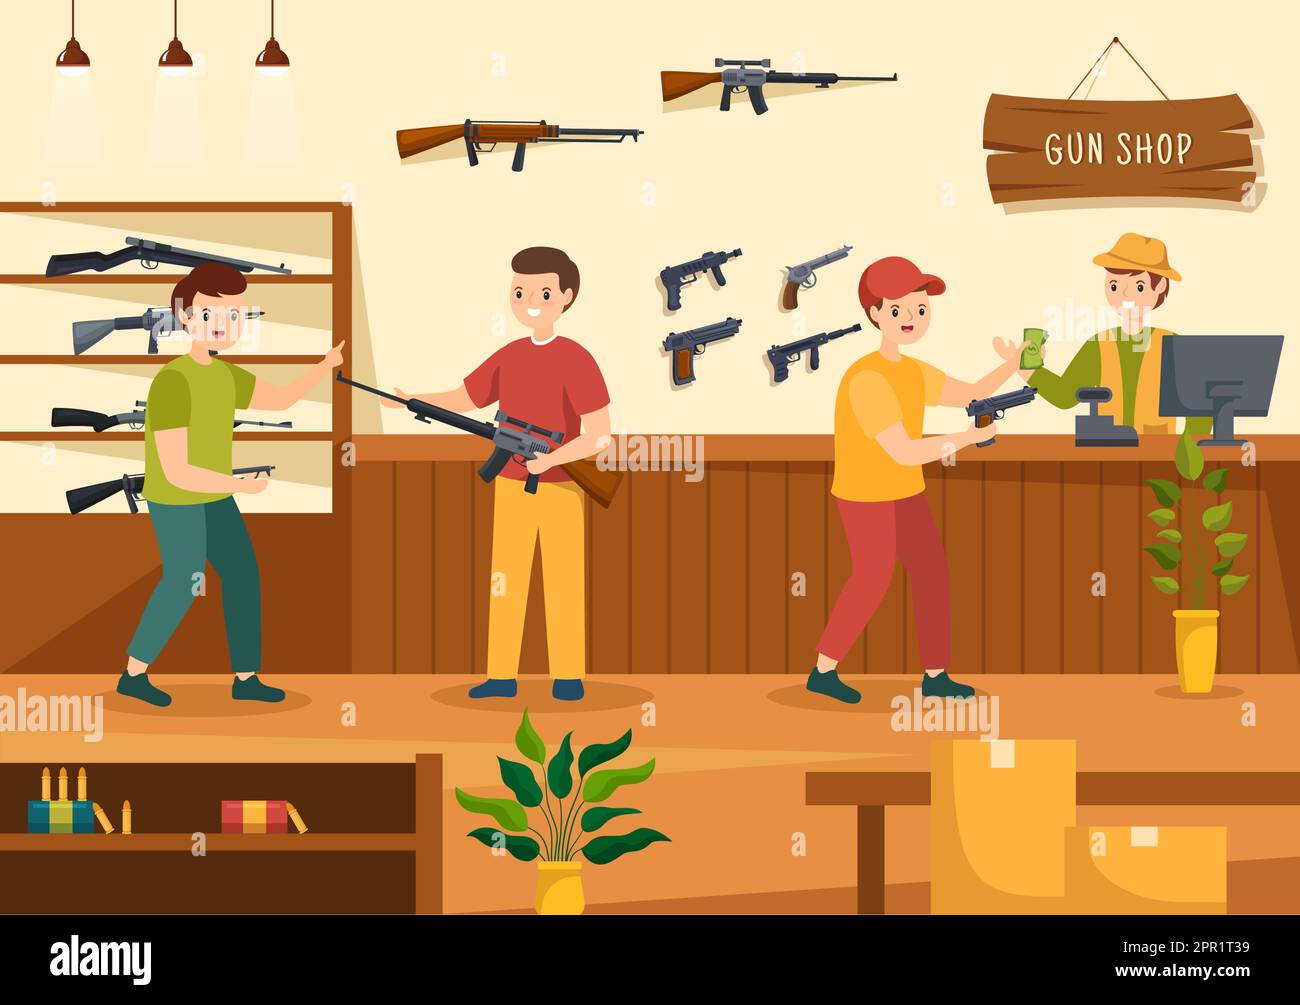 Gun Shop or Hunting with Rifle, Bullet, Weapon and Hunt Equipment in Flat Style Cartoon Hand Drawn Templates Illustration Stock Vector